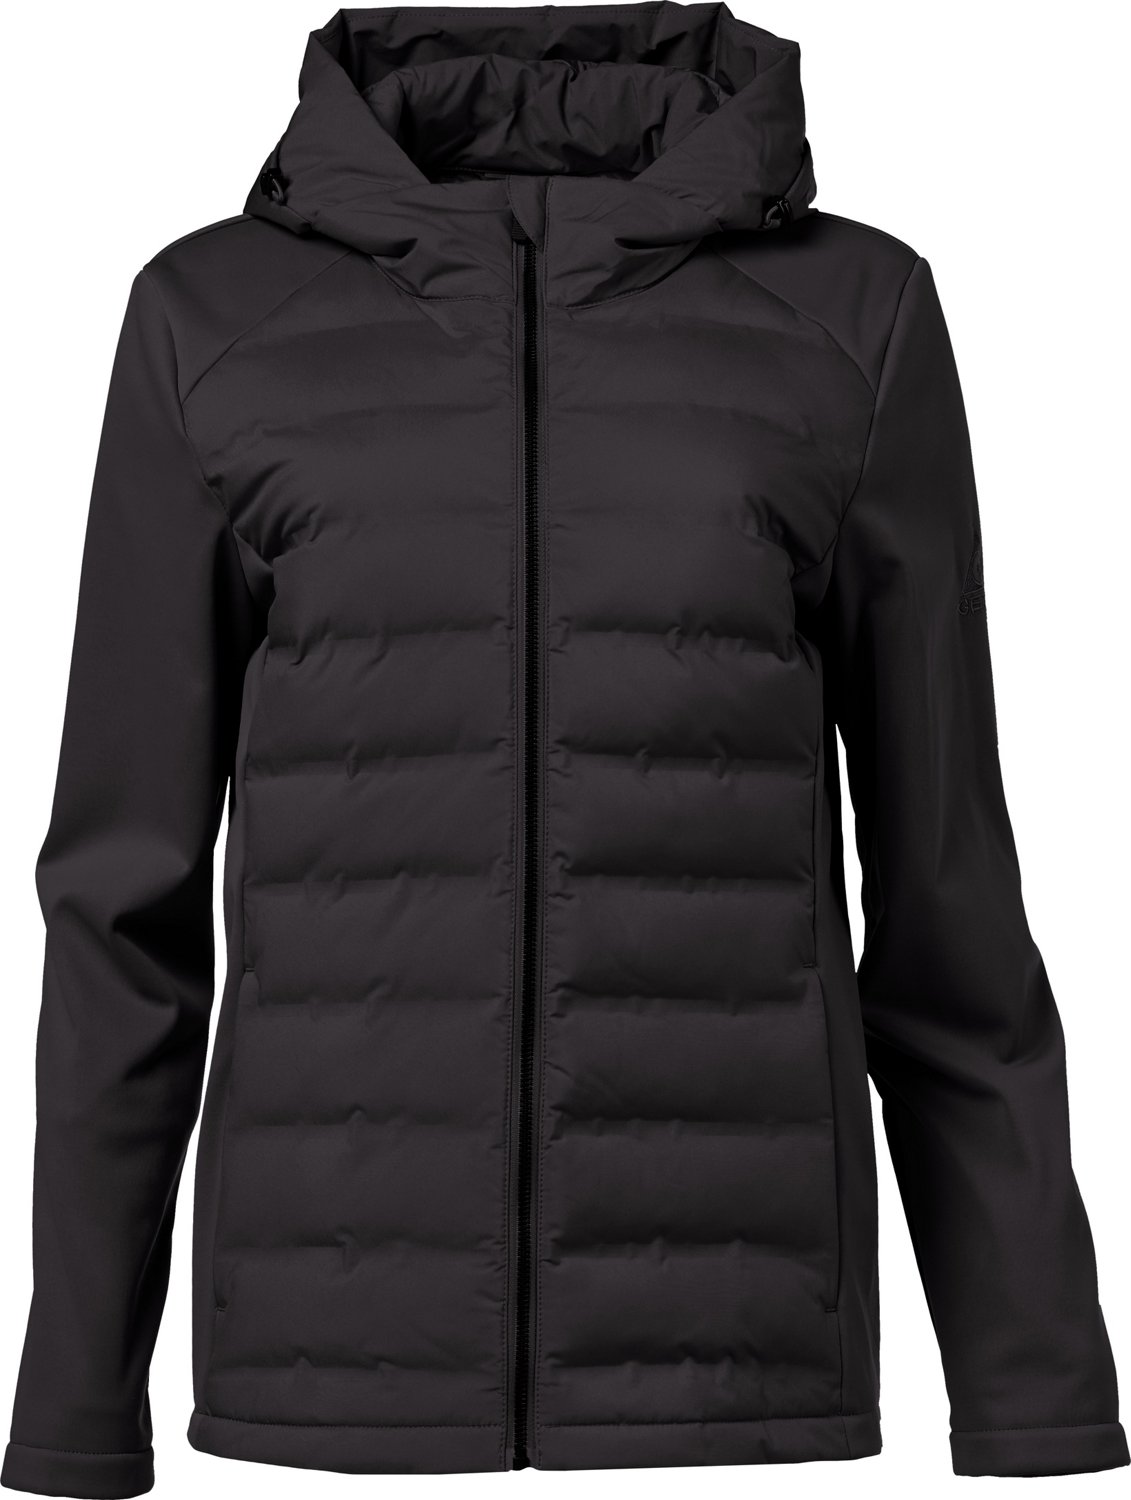 Gerry Women's Mystic Hybrid Jacket | Free Shipping at Academy